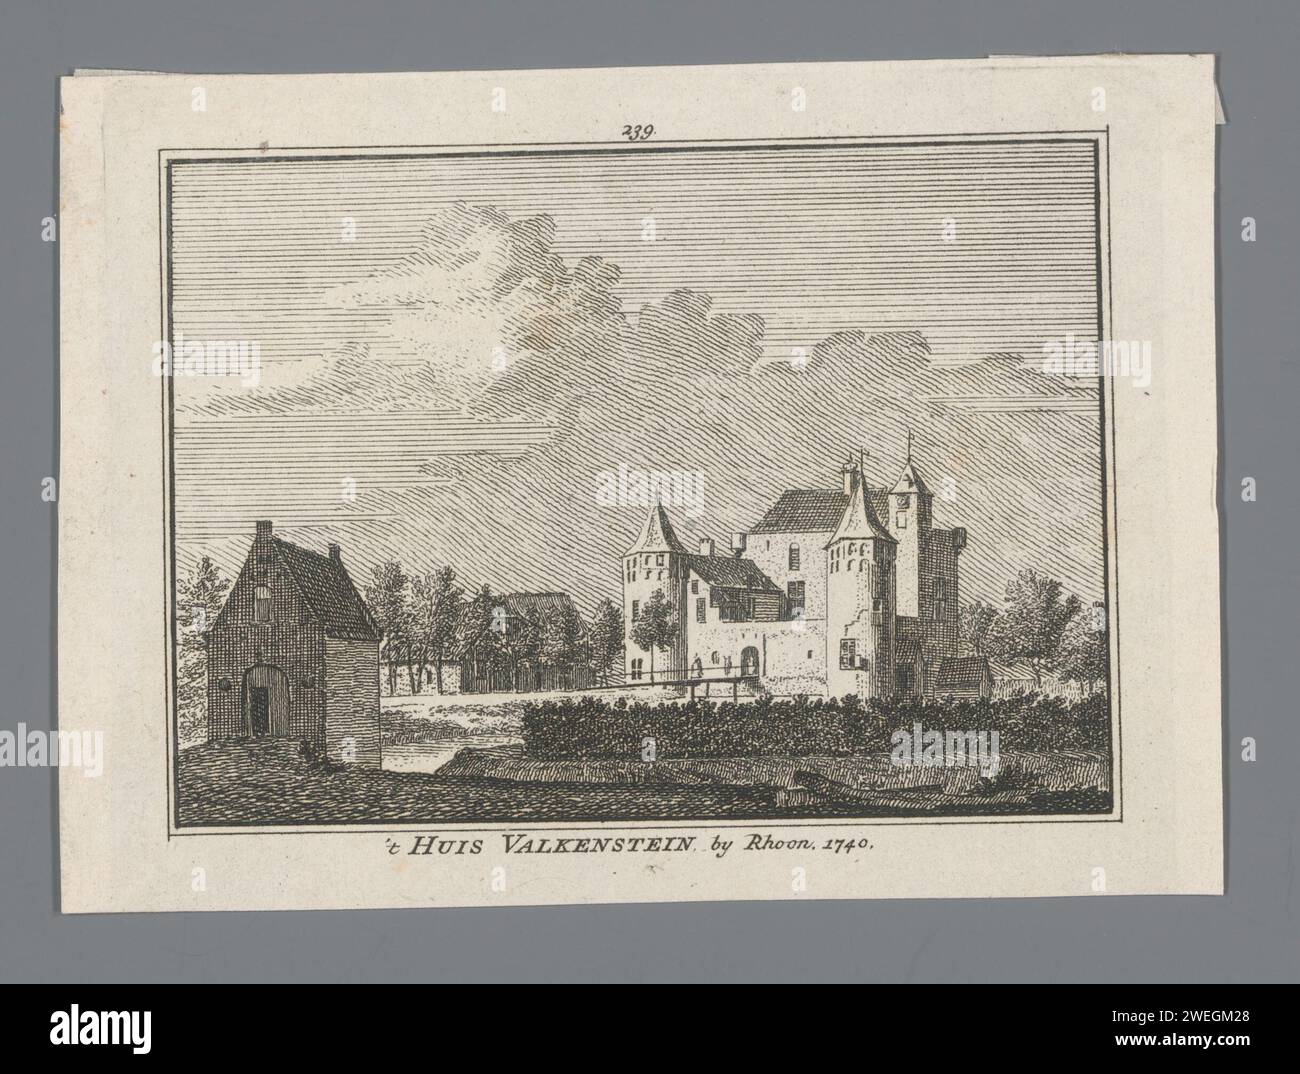 Face locking Valckesteyn in Poortugaal, Hendrik Spilman, after Cornelis Pronk, 1750 print   paper etching / engraving farm or solitary house in landscape Gatebread Stock Photo